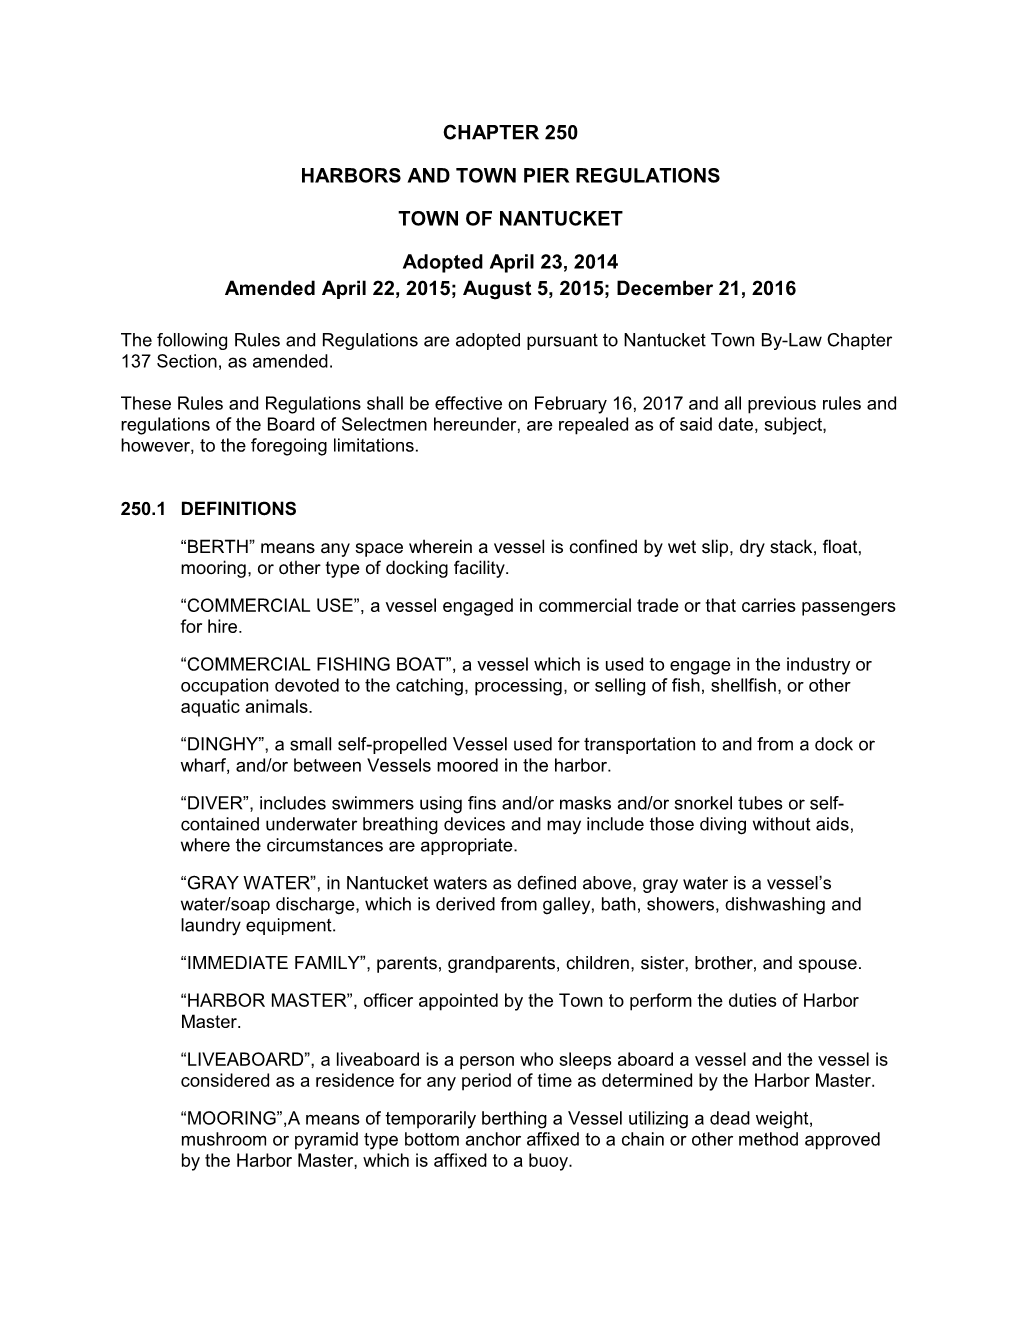 Harbors and Town Pier Regulations